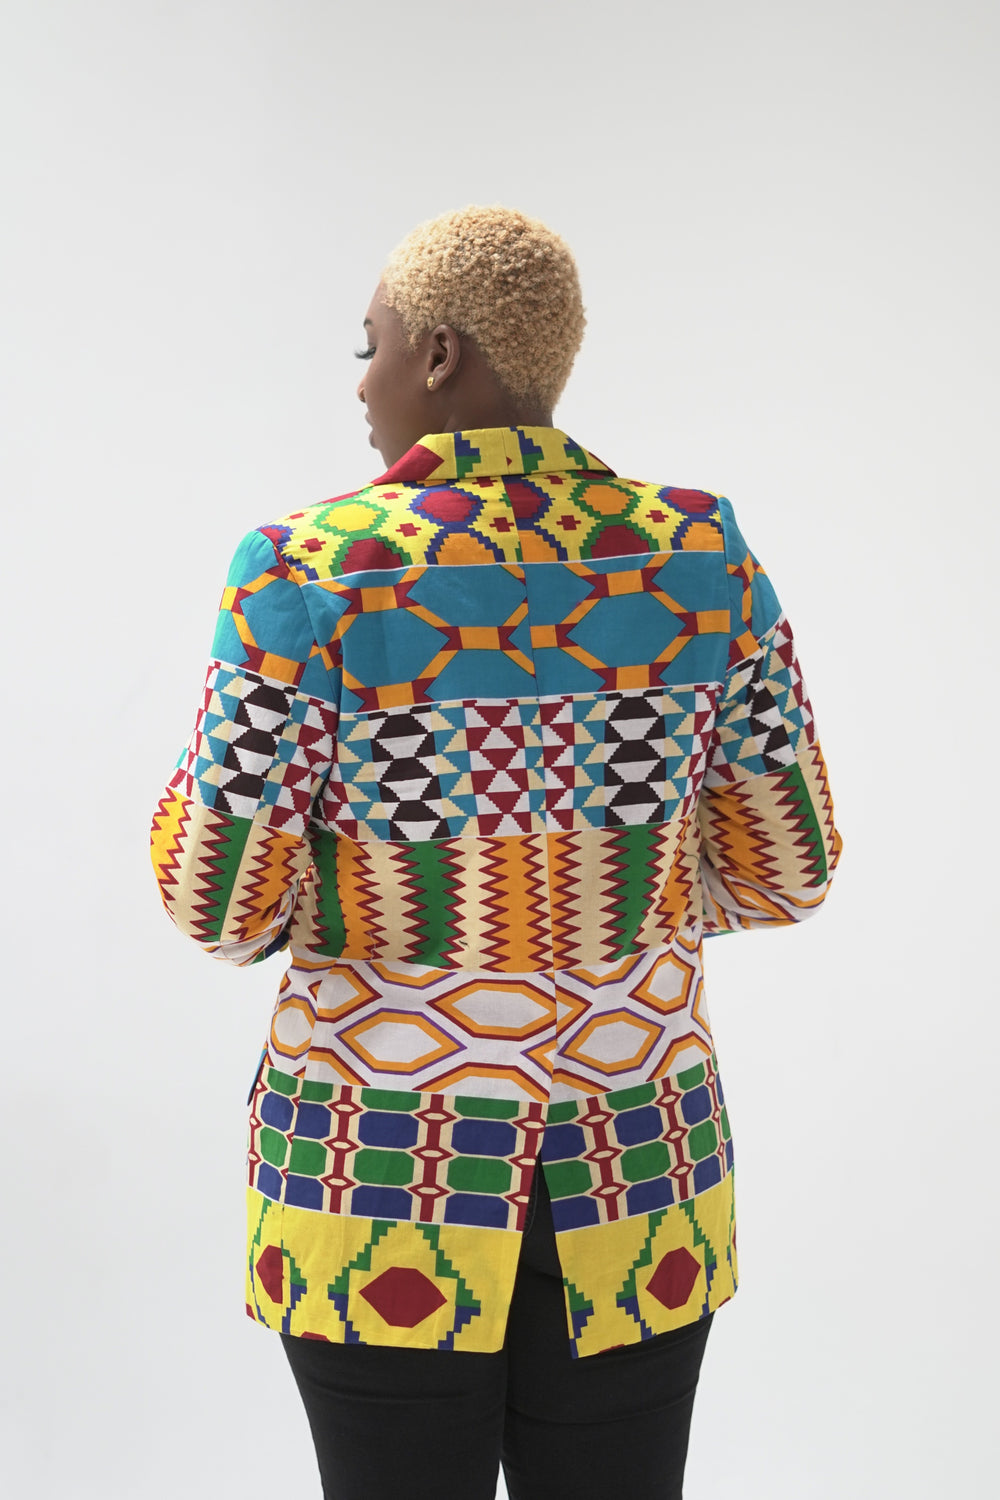 Multicolored and patterned collared blazer with pockets and a tail slit.